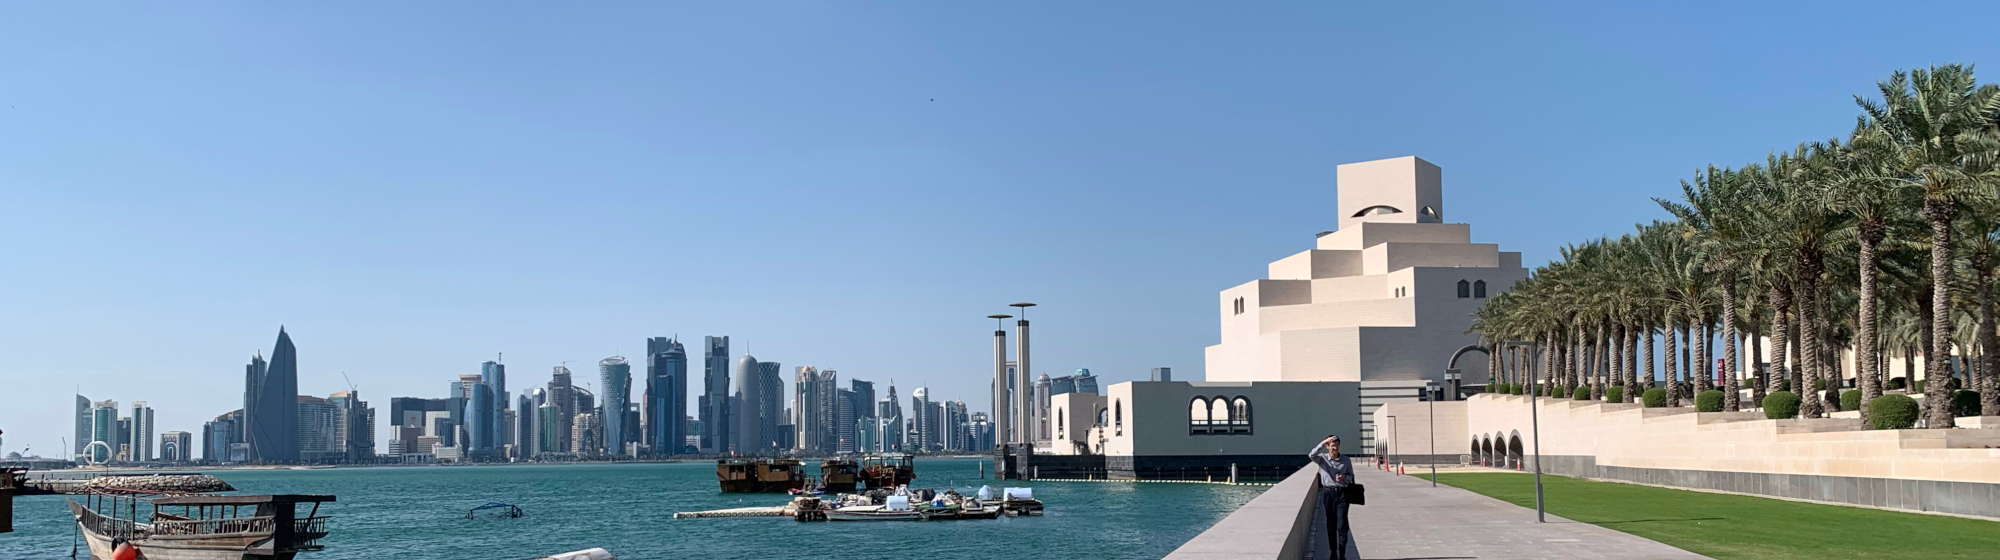 View of Doha's skyline and the Museum of Islamic Art